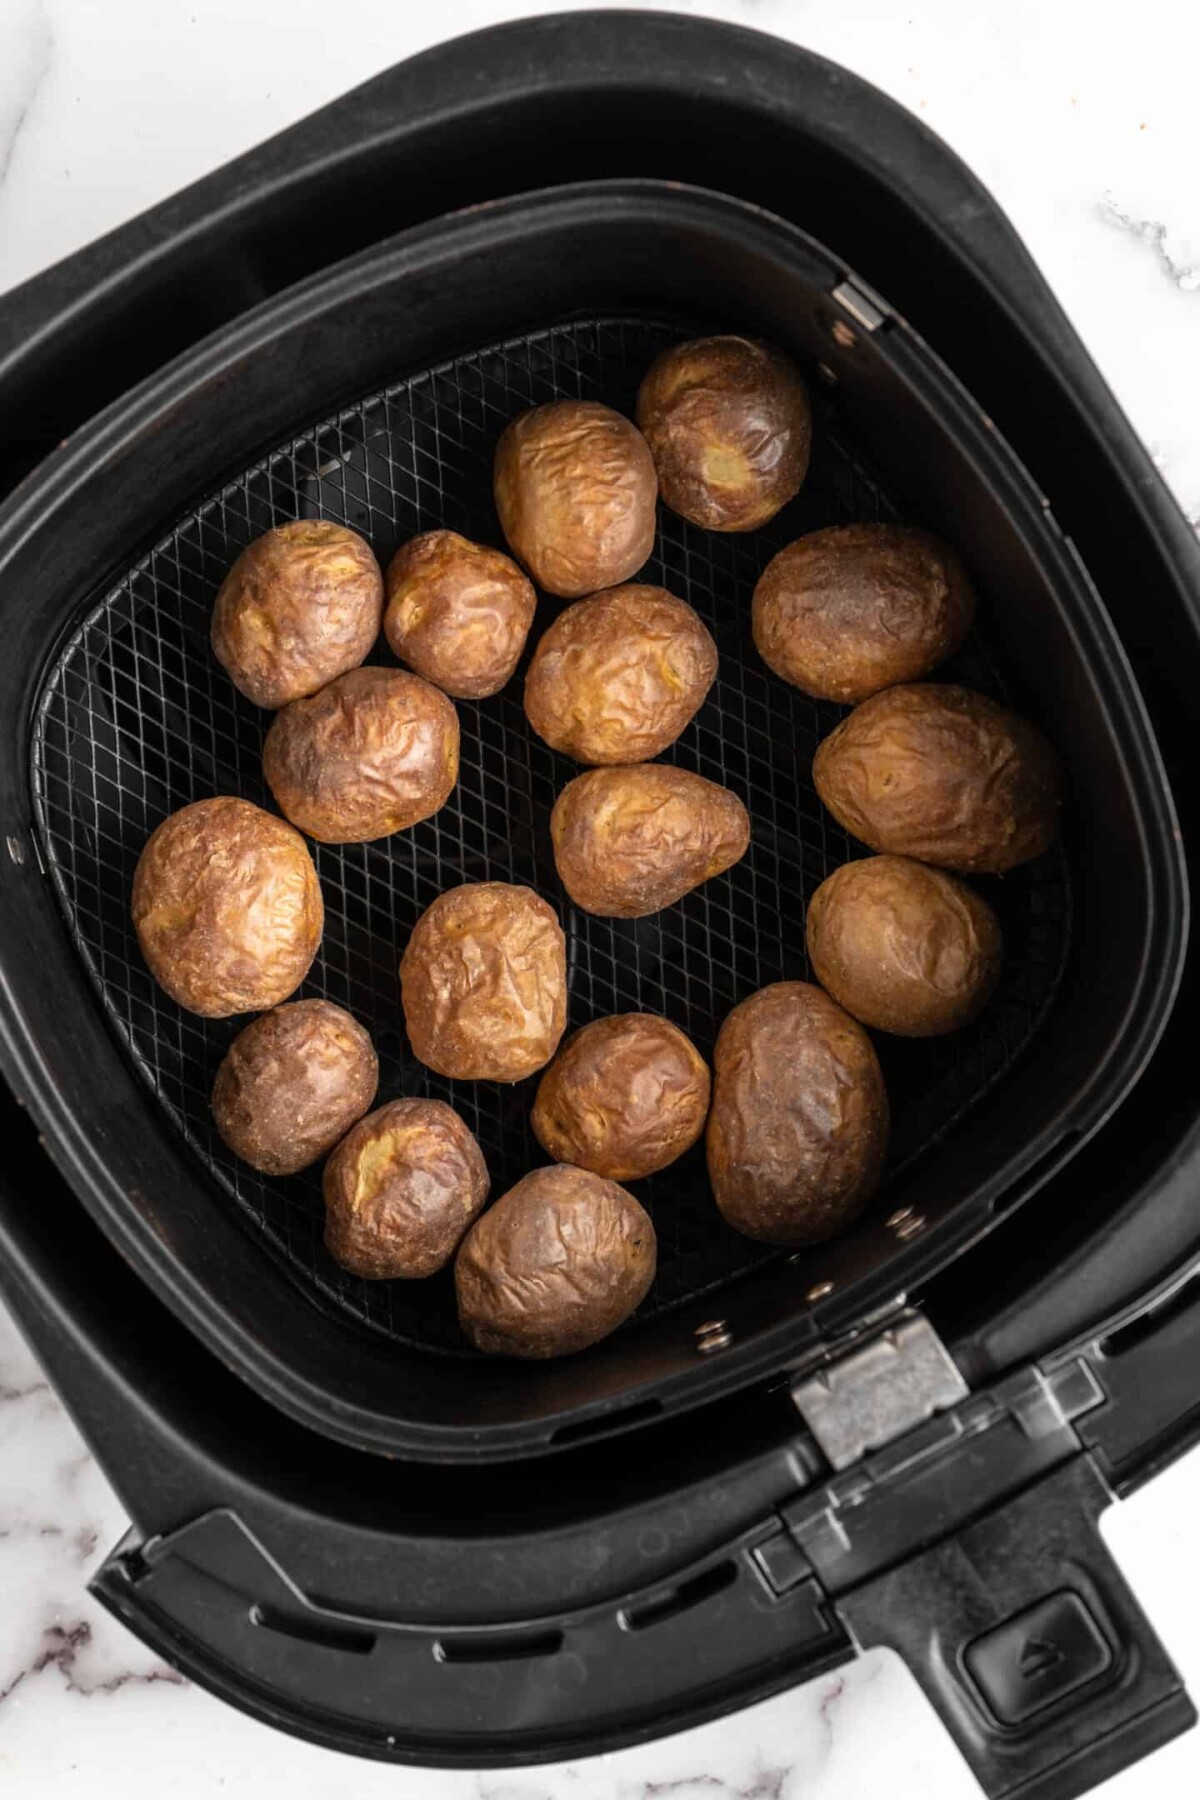 Cooked baby potatoes in an air fryer basket